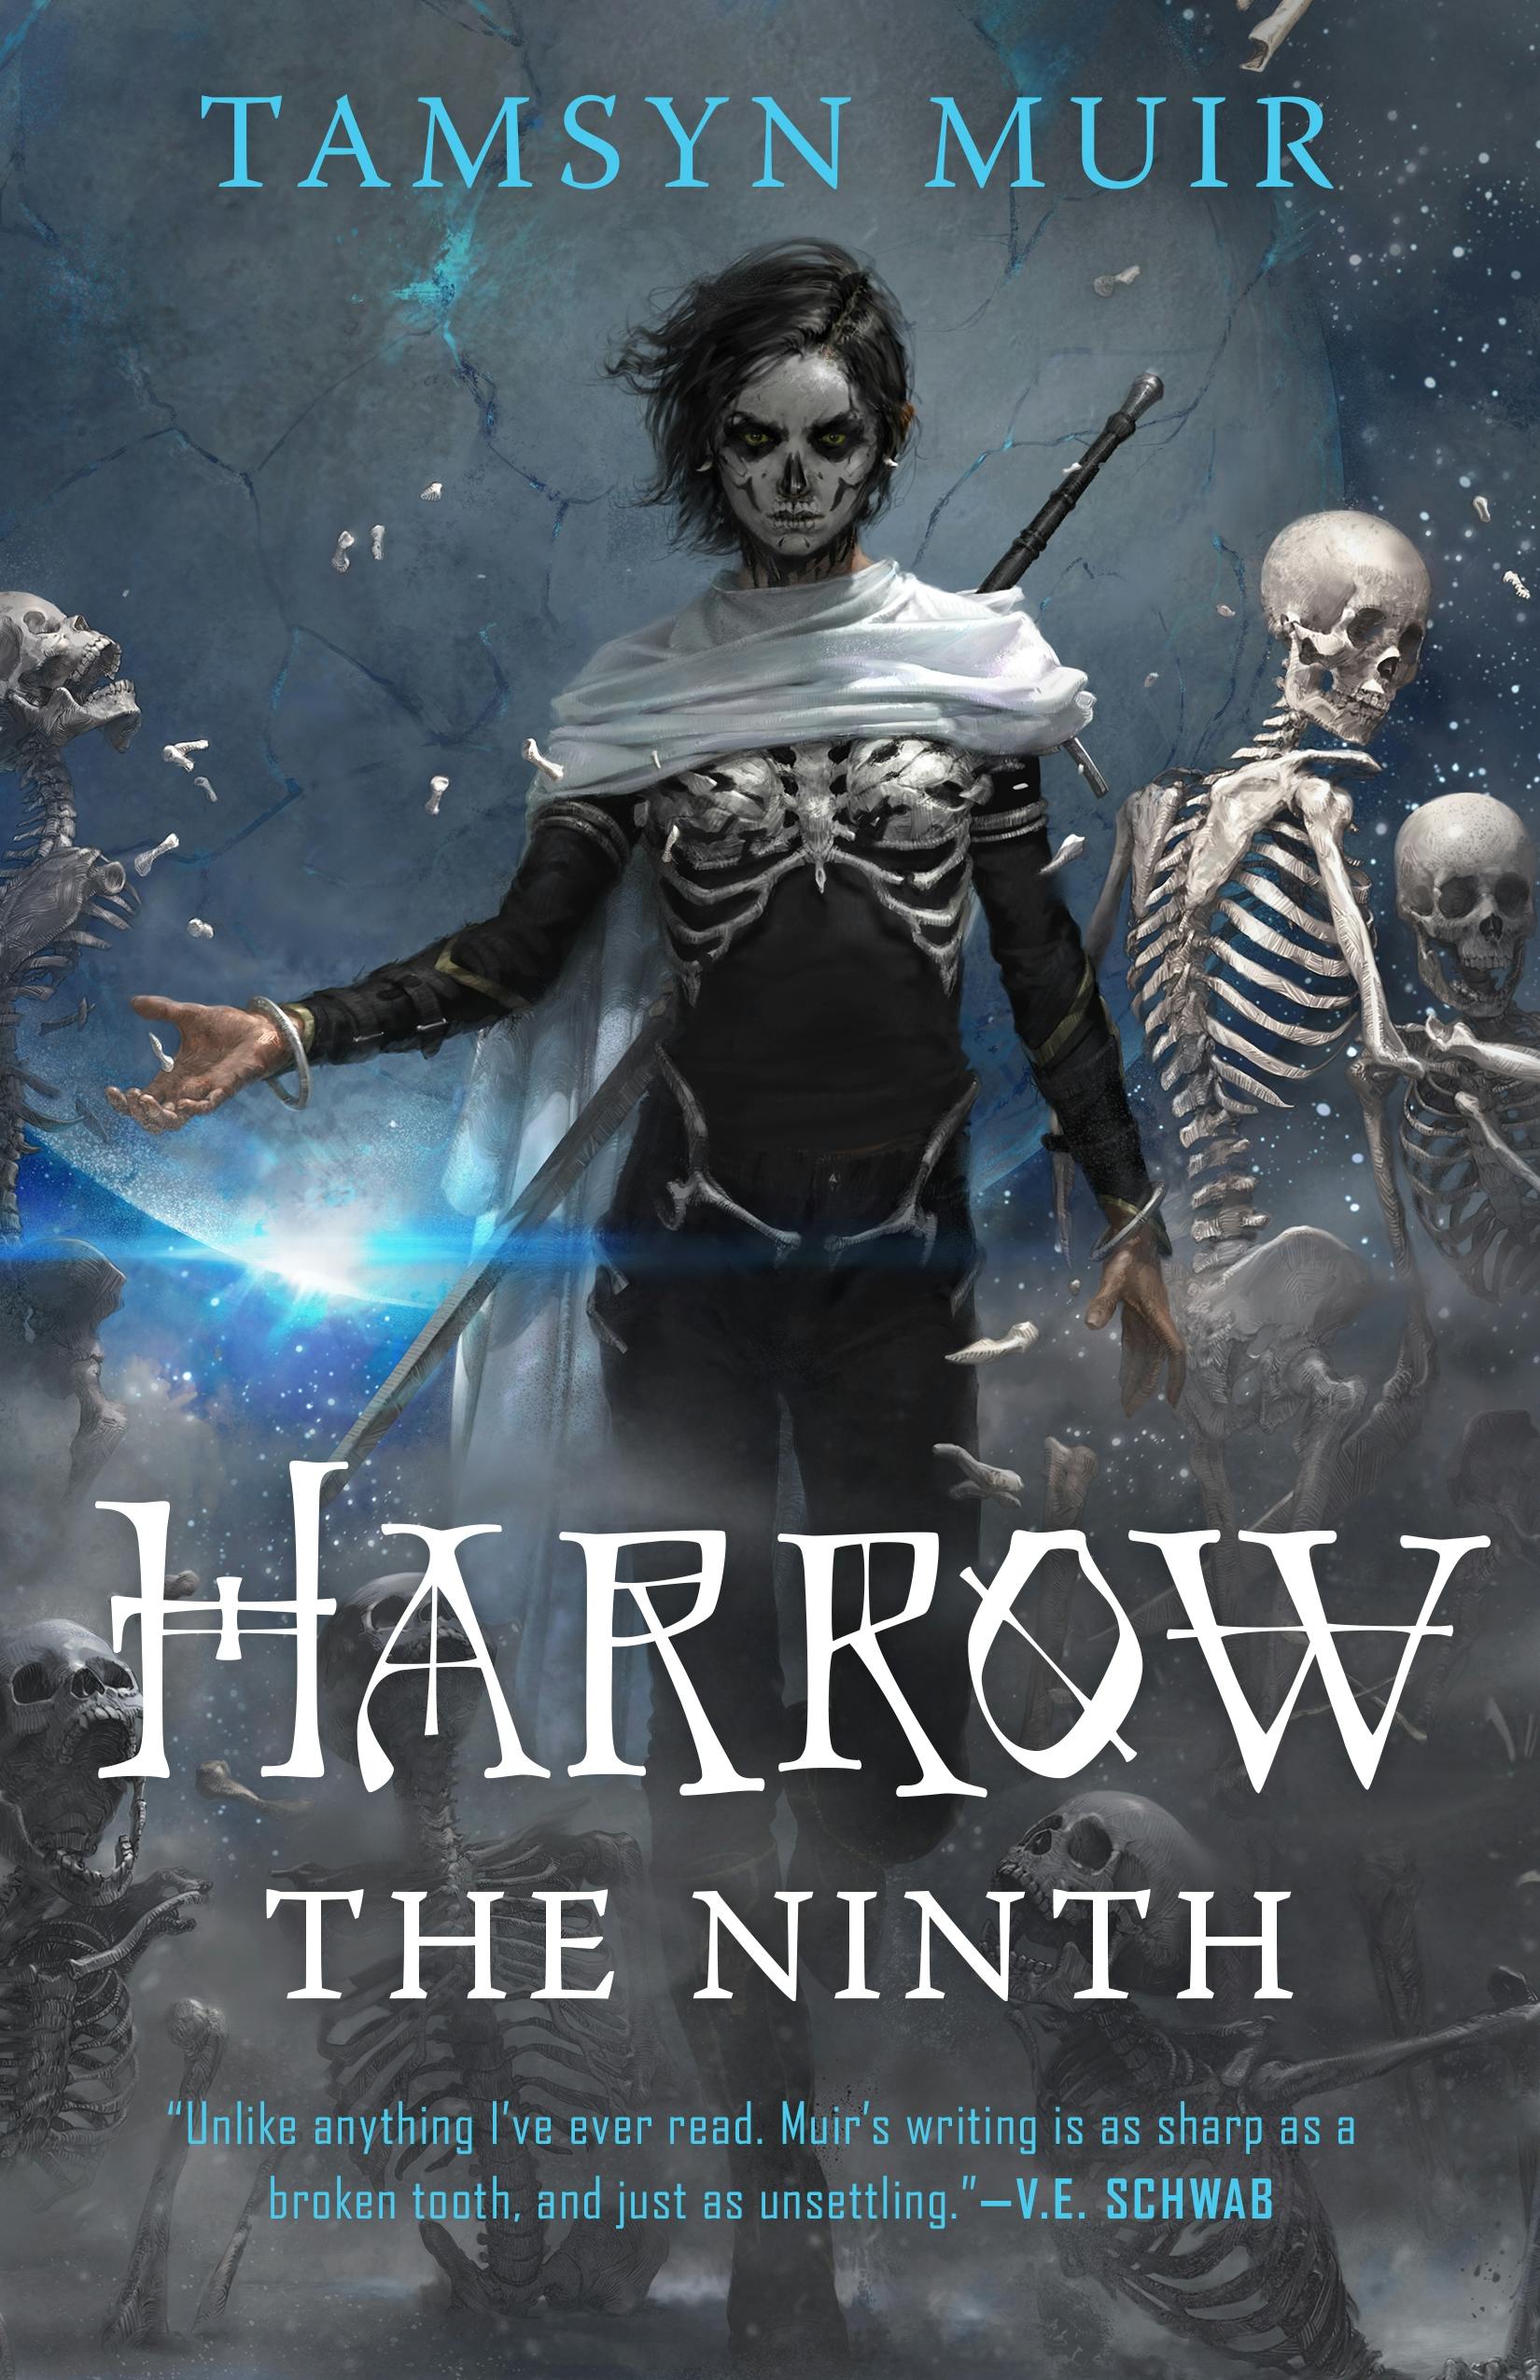 Cover for the book titled as: Harrow the Ninth